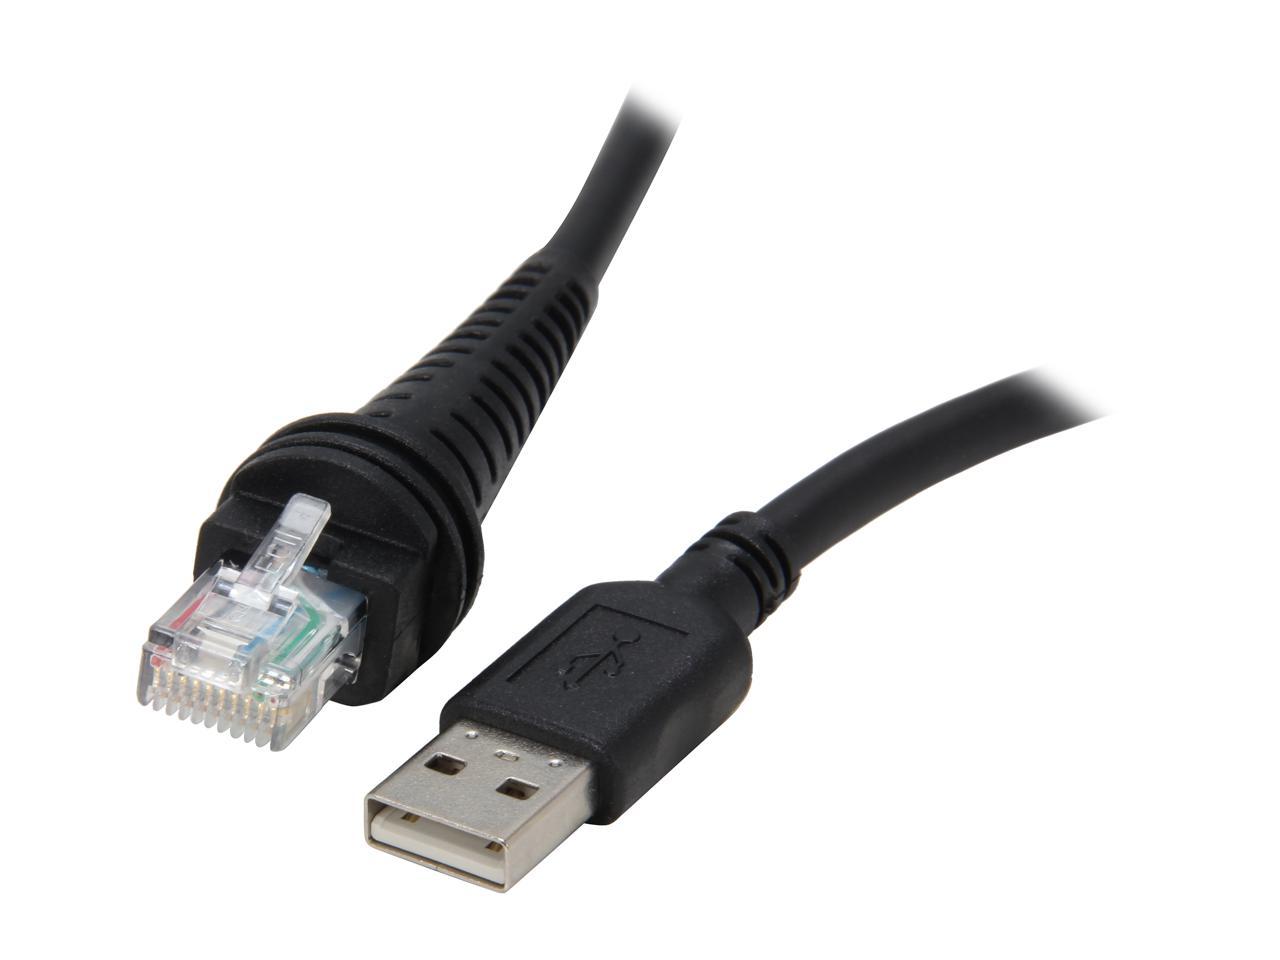 HONEYWELL CBL-500-300-S00 MALE USB CABLE TYPE A 3M/9.8' 5V HOST POWER BS-CB NEW